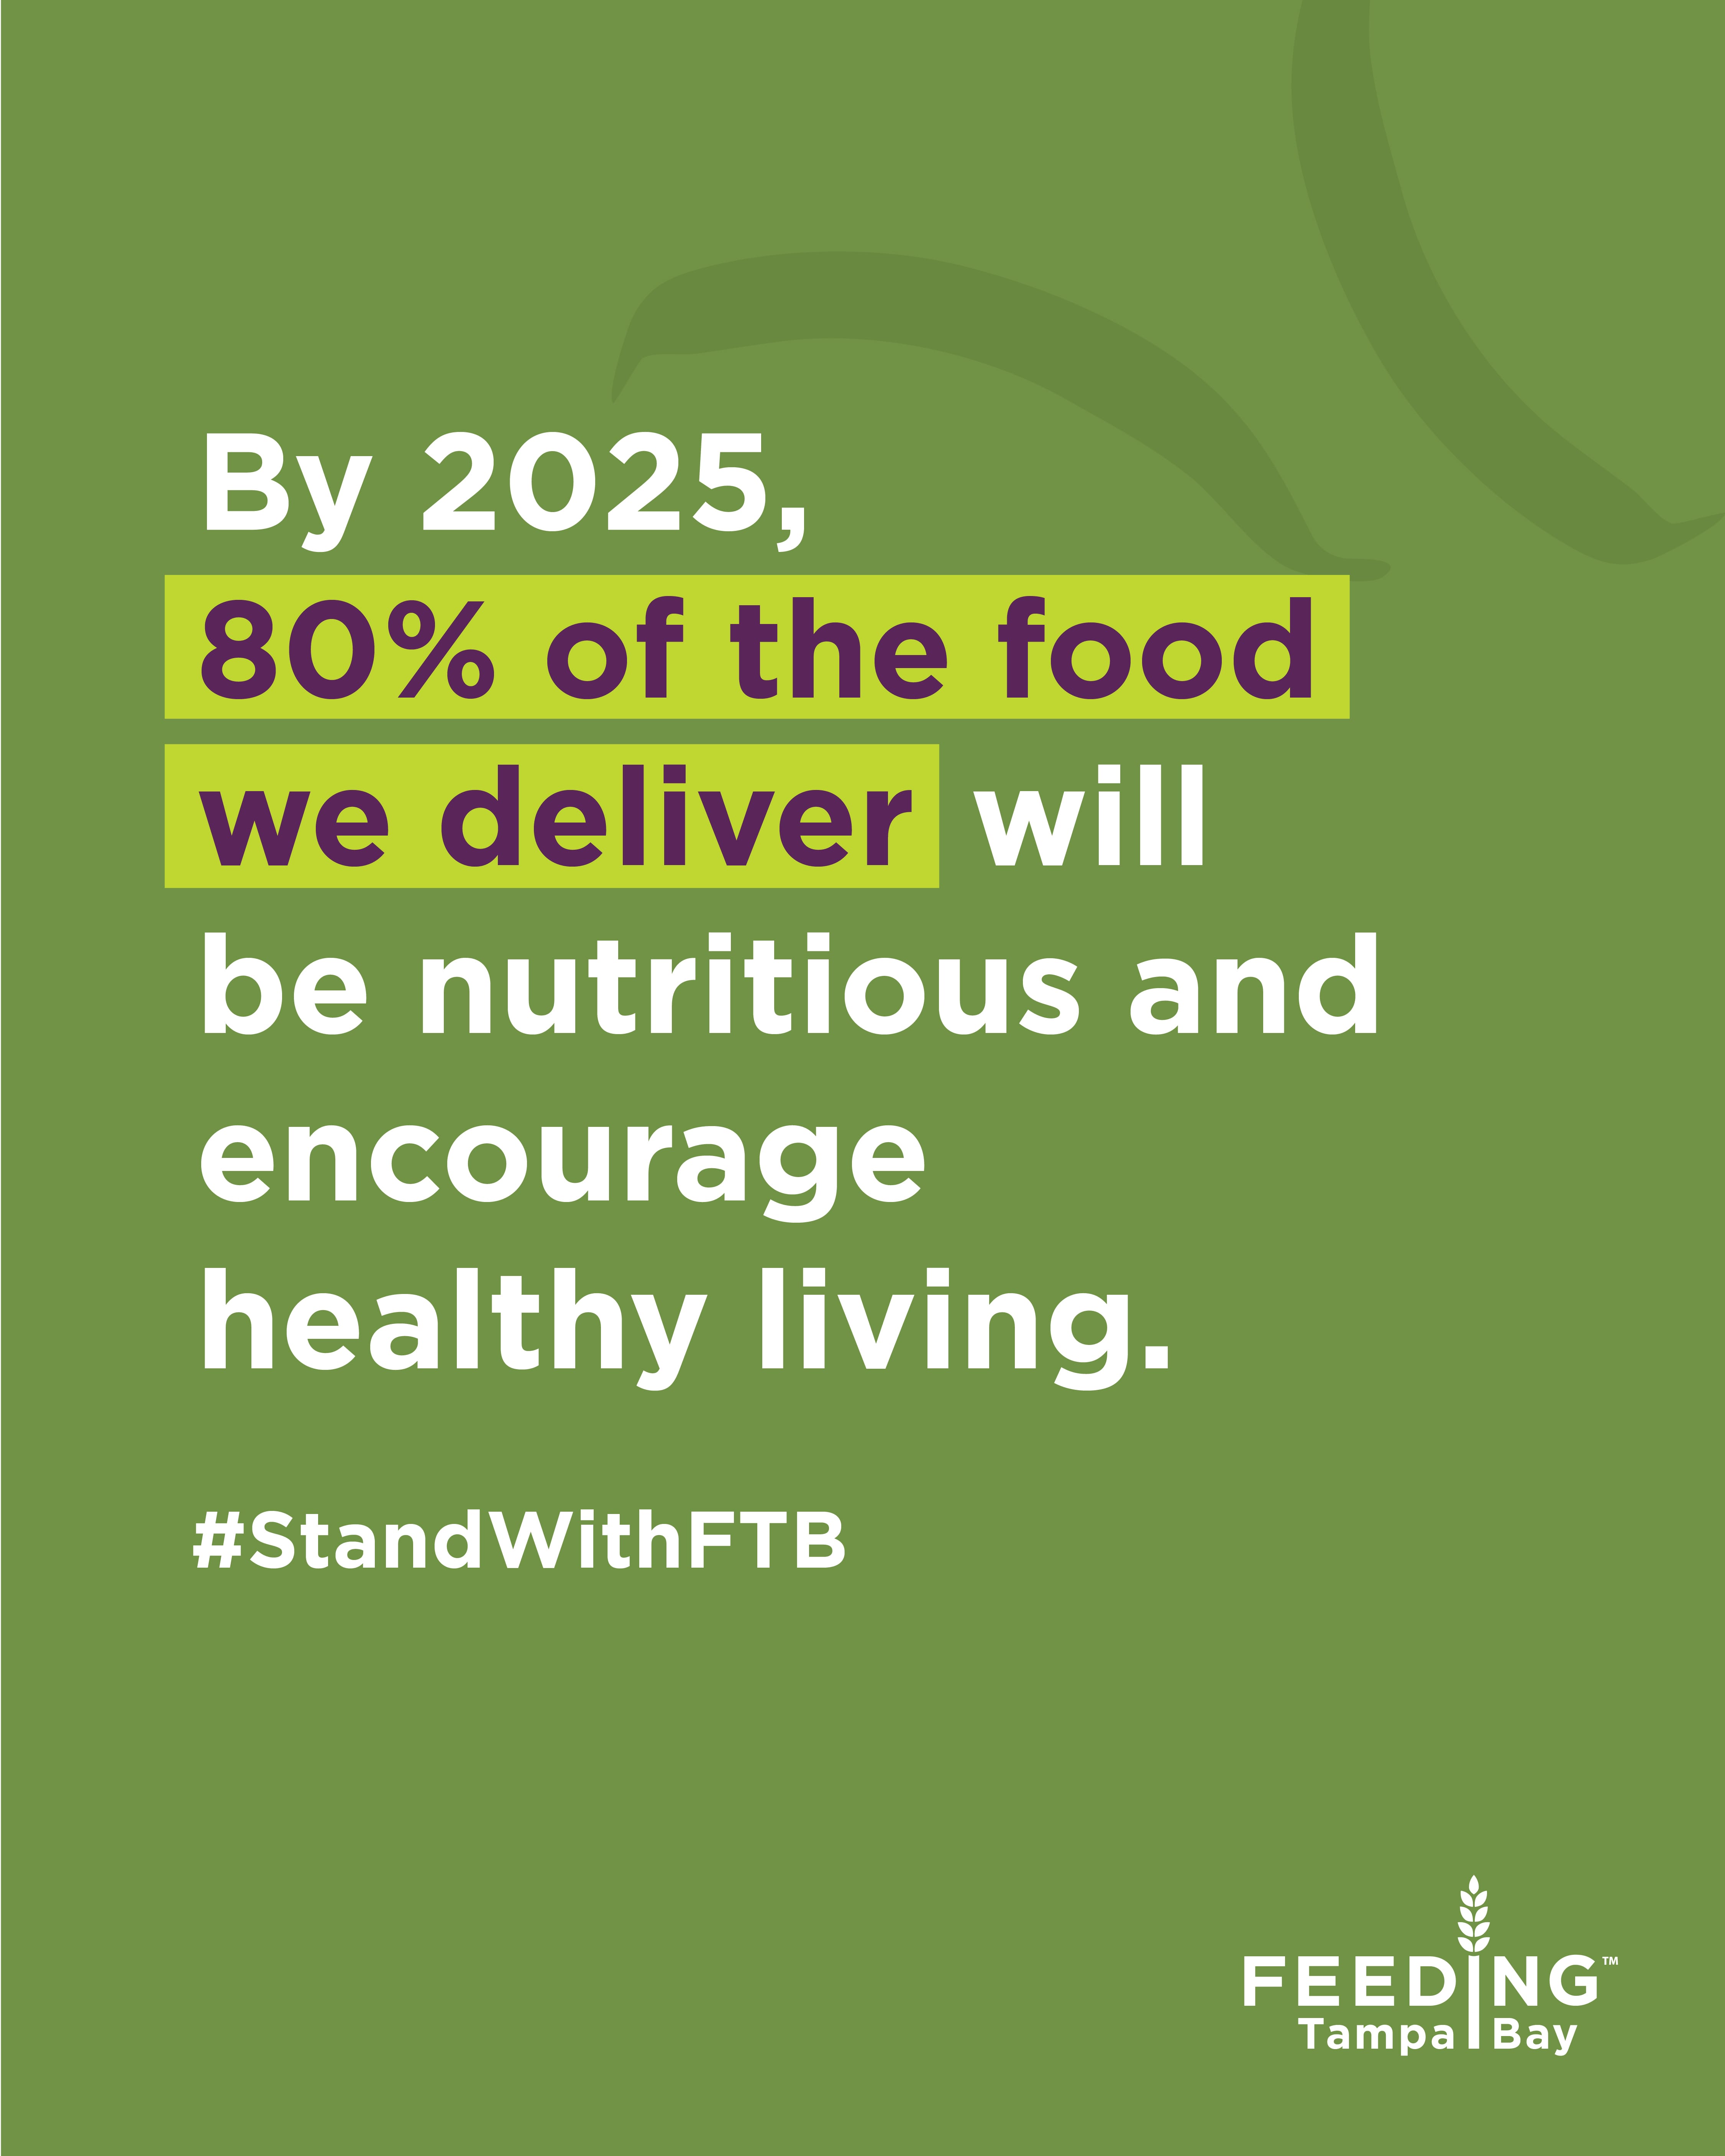 Graphic stating by 2025 80% of the food we deliver will be nutritious and encourage healthy living